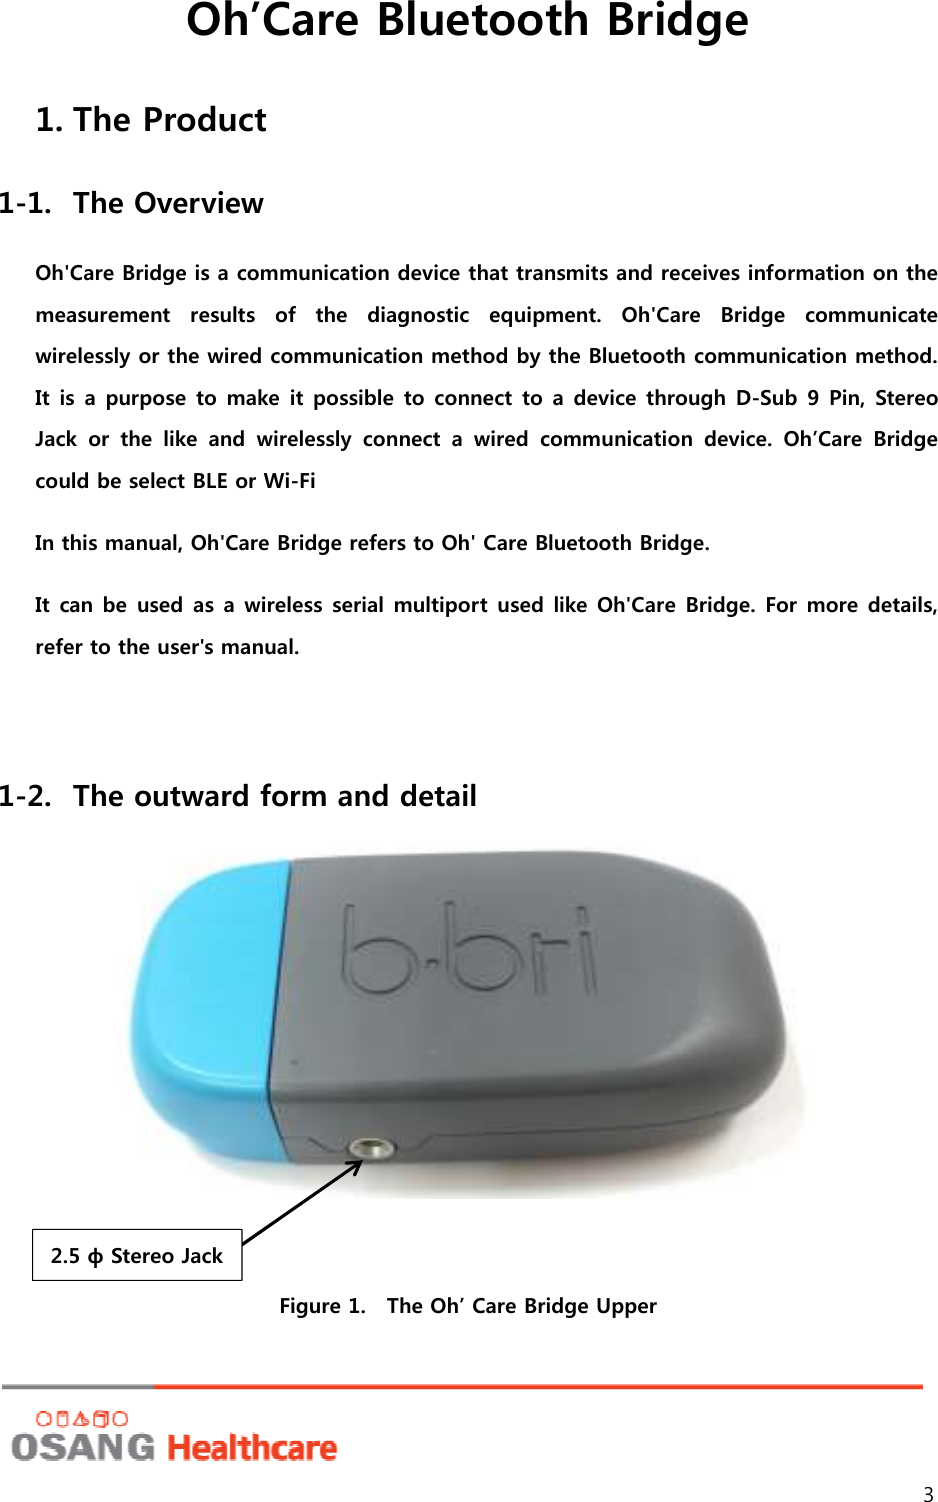 Oh’Care Bluetooth Bridge 3 1. The Product 1-1. The Overview Oh&apos;Care Bridge is a communication device that transmits and receives information on the measurement  results  of  the  diagnostic  equipment.  Oh&apos;Care  Bridge  communicate wirelessly or the wired communication method by the Bluetooth communication method. It is a  purpose to  make it possible to connect to  a device through D-Sub 9  Pin, Stereo Jack  or  the  like  and  wirelessly  connect  a  wired  communication  device.  Oh’Care  Bridge could be select BLE or Wi-Fi In this manual, Oh&apos;Care Bridge refers to Oh&apos; Care Bluetooth Bridge.   It can be used as a wireless serial multiport  used like Oh&apos;Care Bridge. For more details, refer to the user&apos;s manual.  1-2. The outward form and detail    Figure 1.    The Oh’ Care Bridge Upper 2.5 ф Stereo Jack 